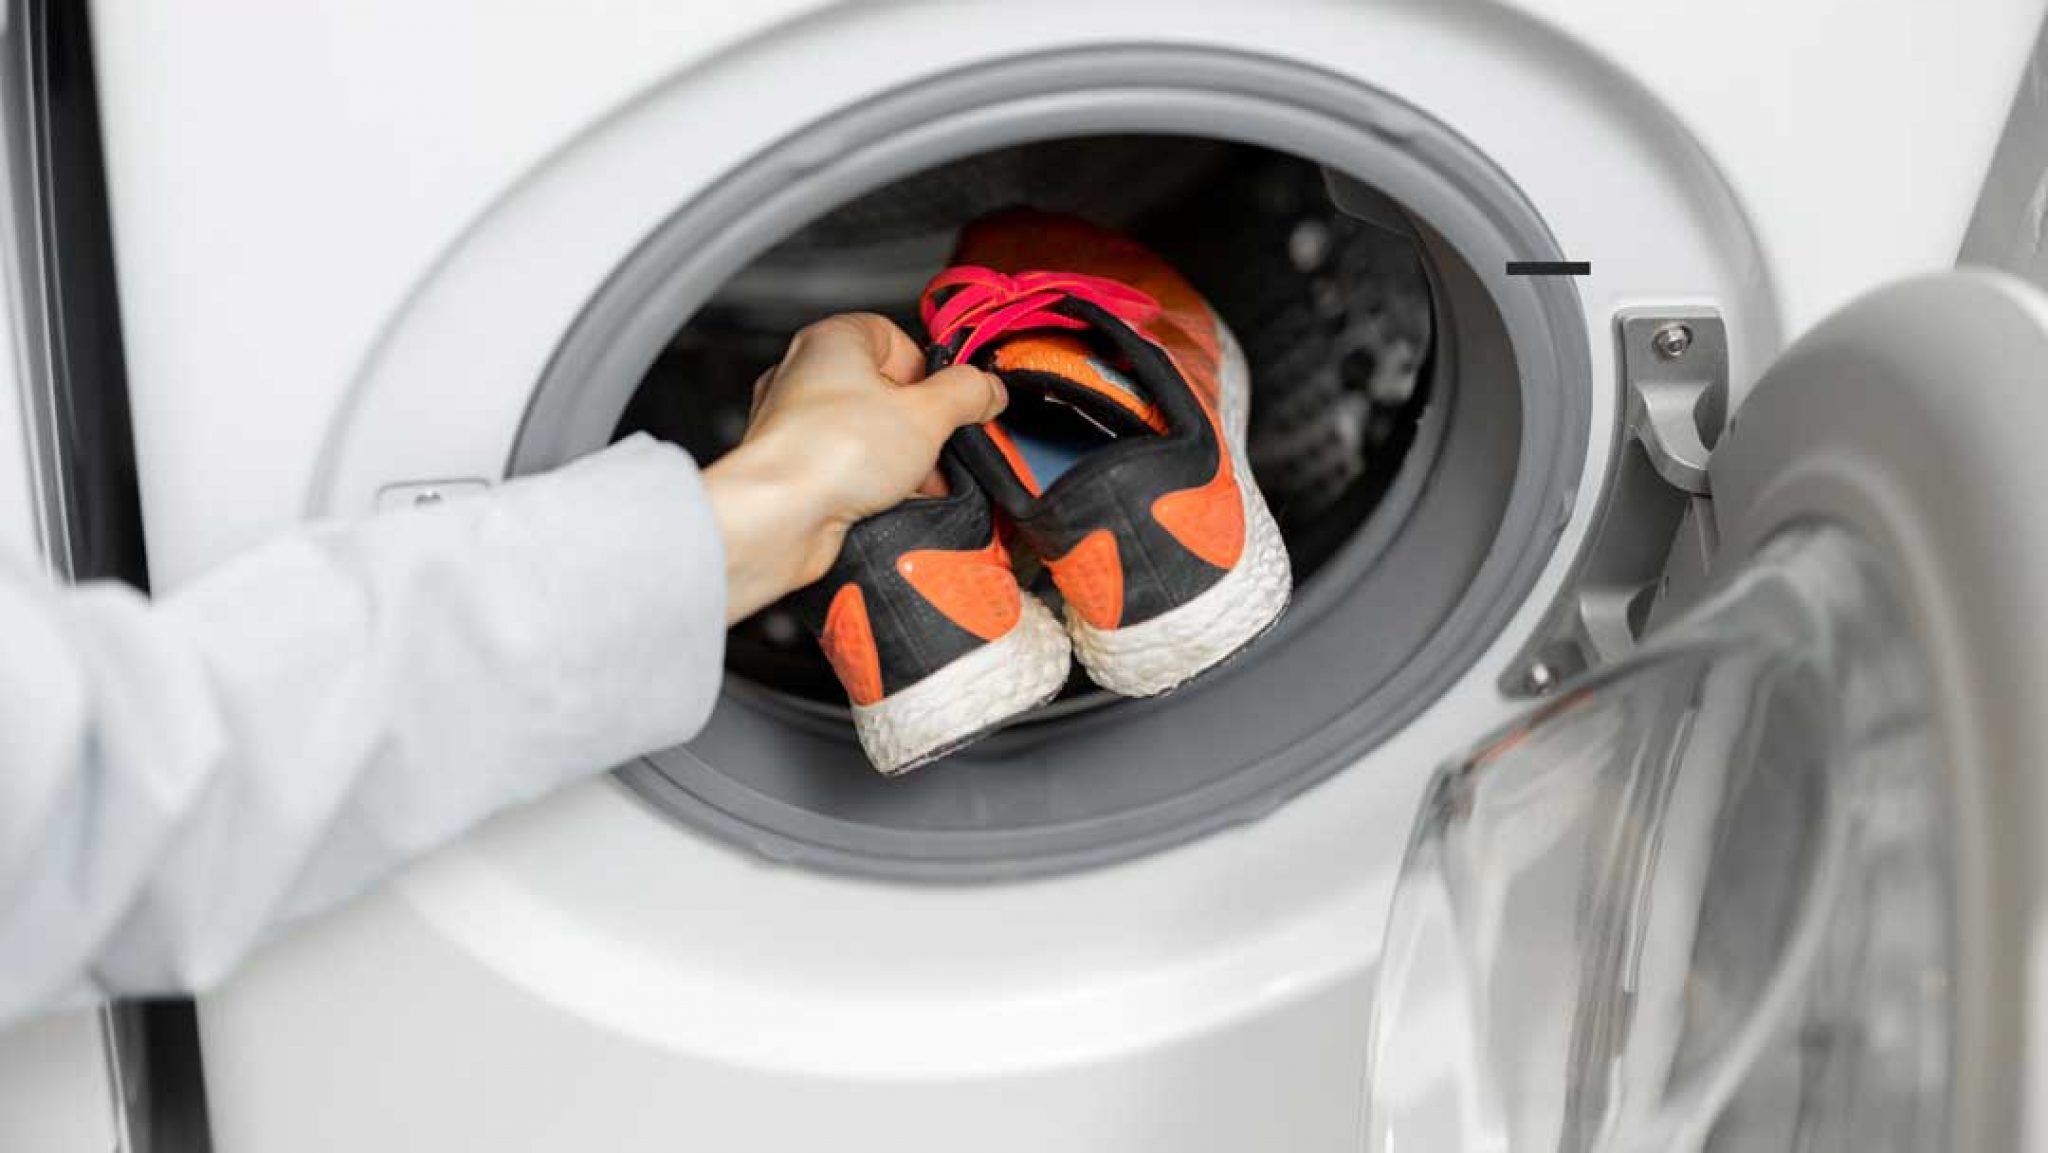 How To Wash Shoes In A Washing Machine